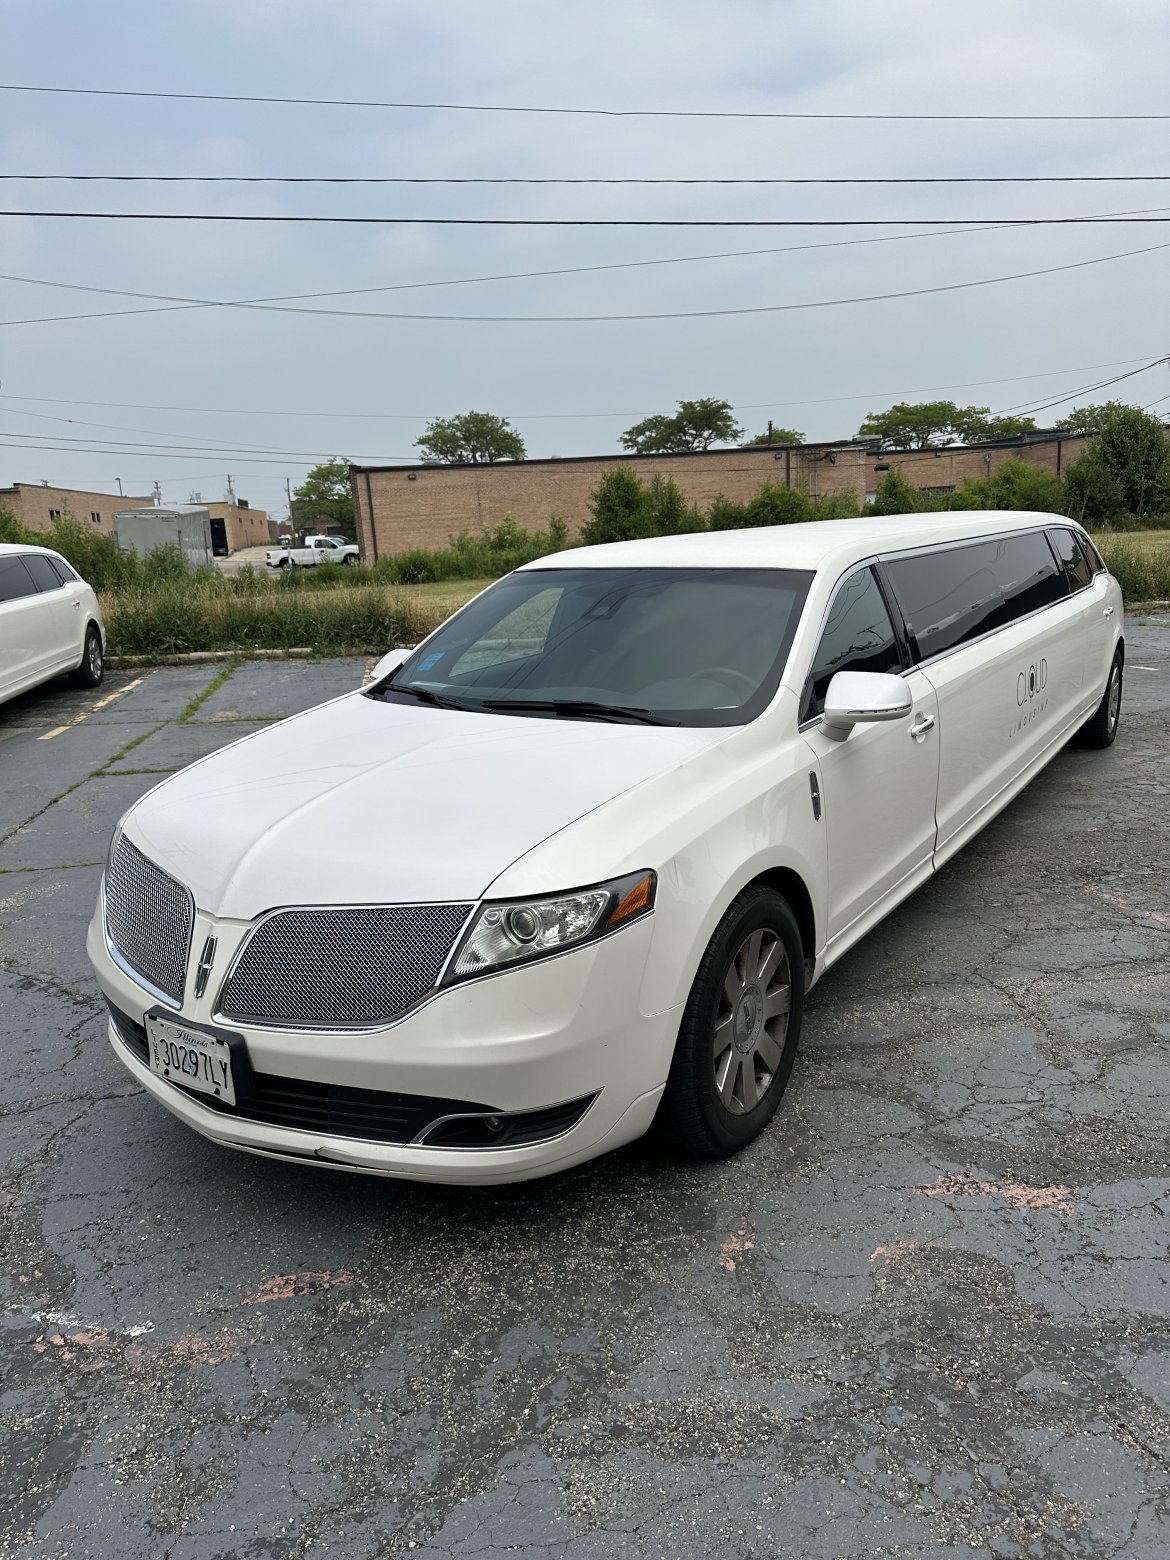 Limousine for sale: 2016 Lincoln MKT by Tiffany